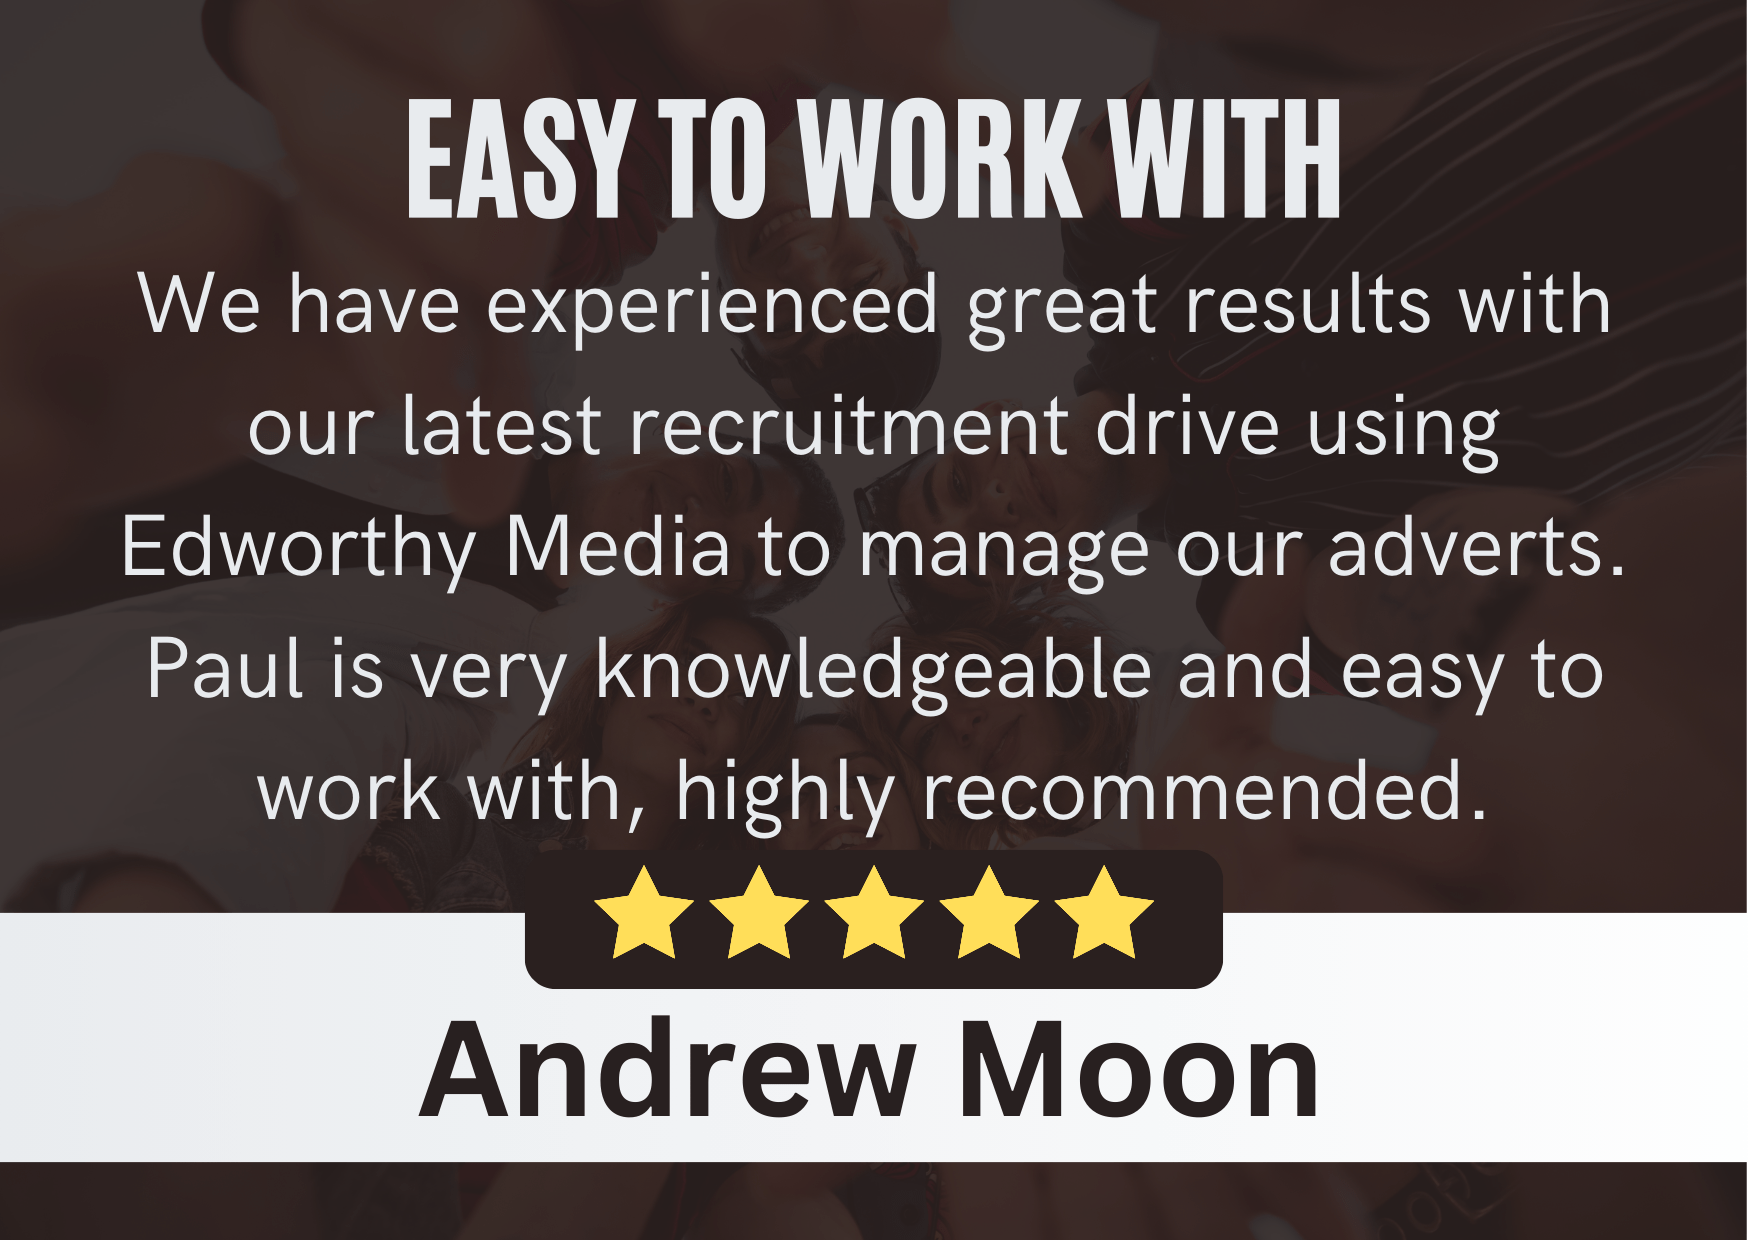 Andrew Moon - Edworthy Media Review | PPC Agency Social Media management Services Exeter. Review Content: We have experienced great results with our latest recruitment drive using Edworthy Media to manage our adverts. Paul is very knowledgeable and easy to work with, highly recommended.